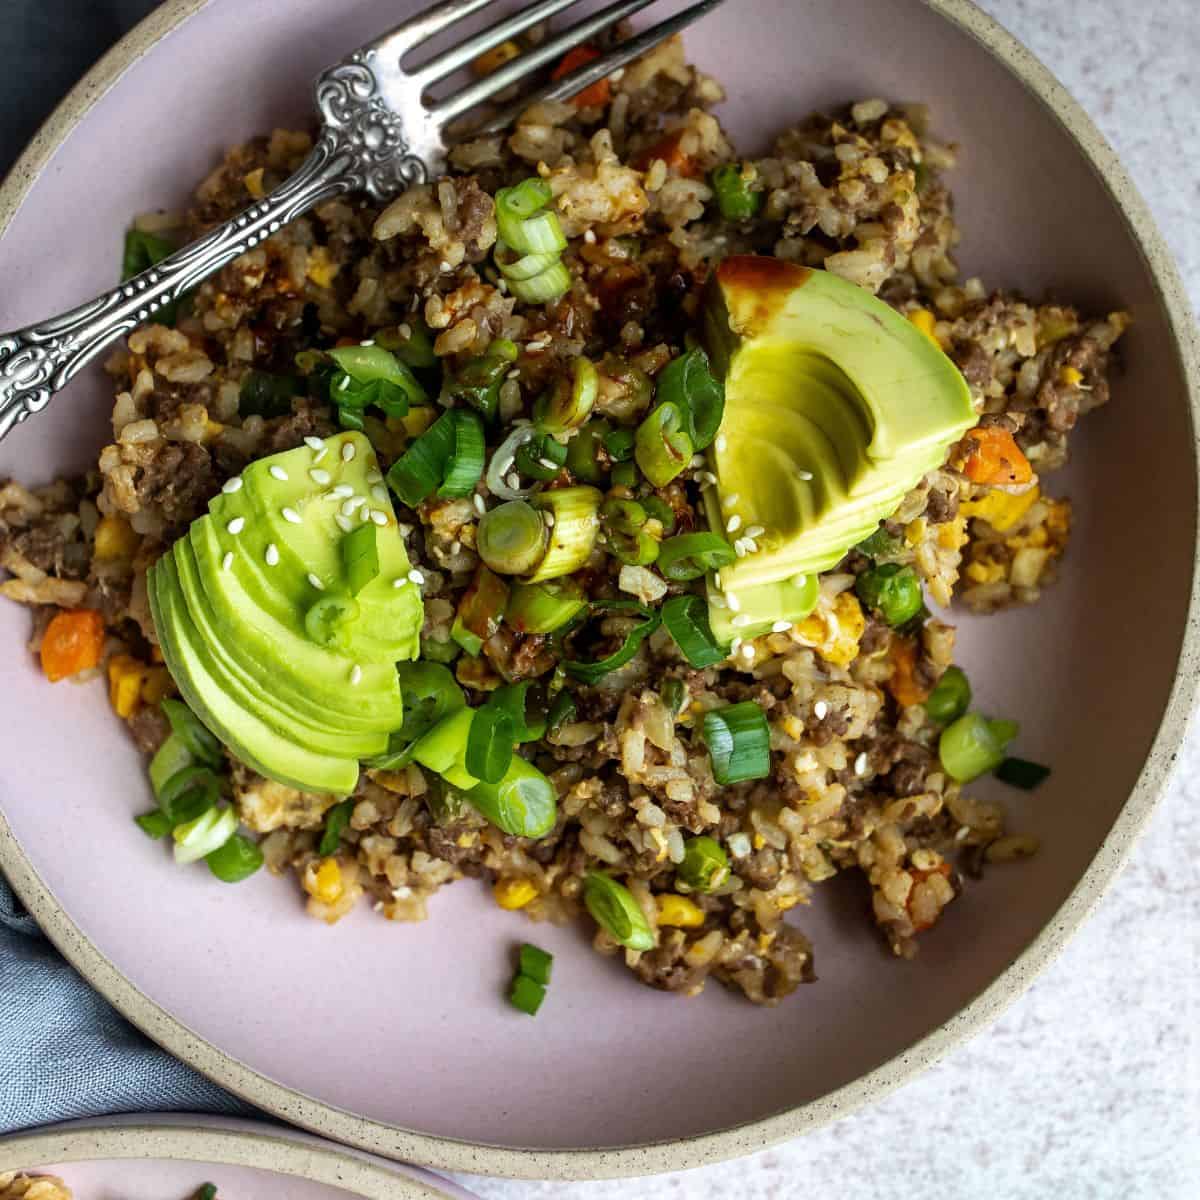  Hamburger fried rice in a pink bowl topped with green onions and sliced avocado.